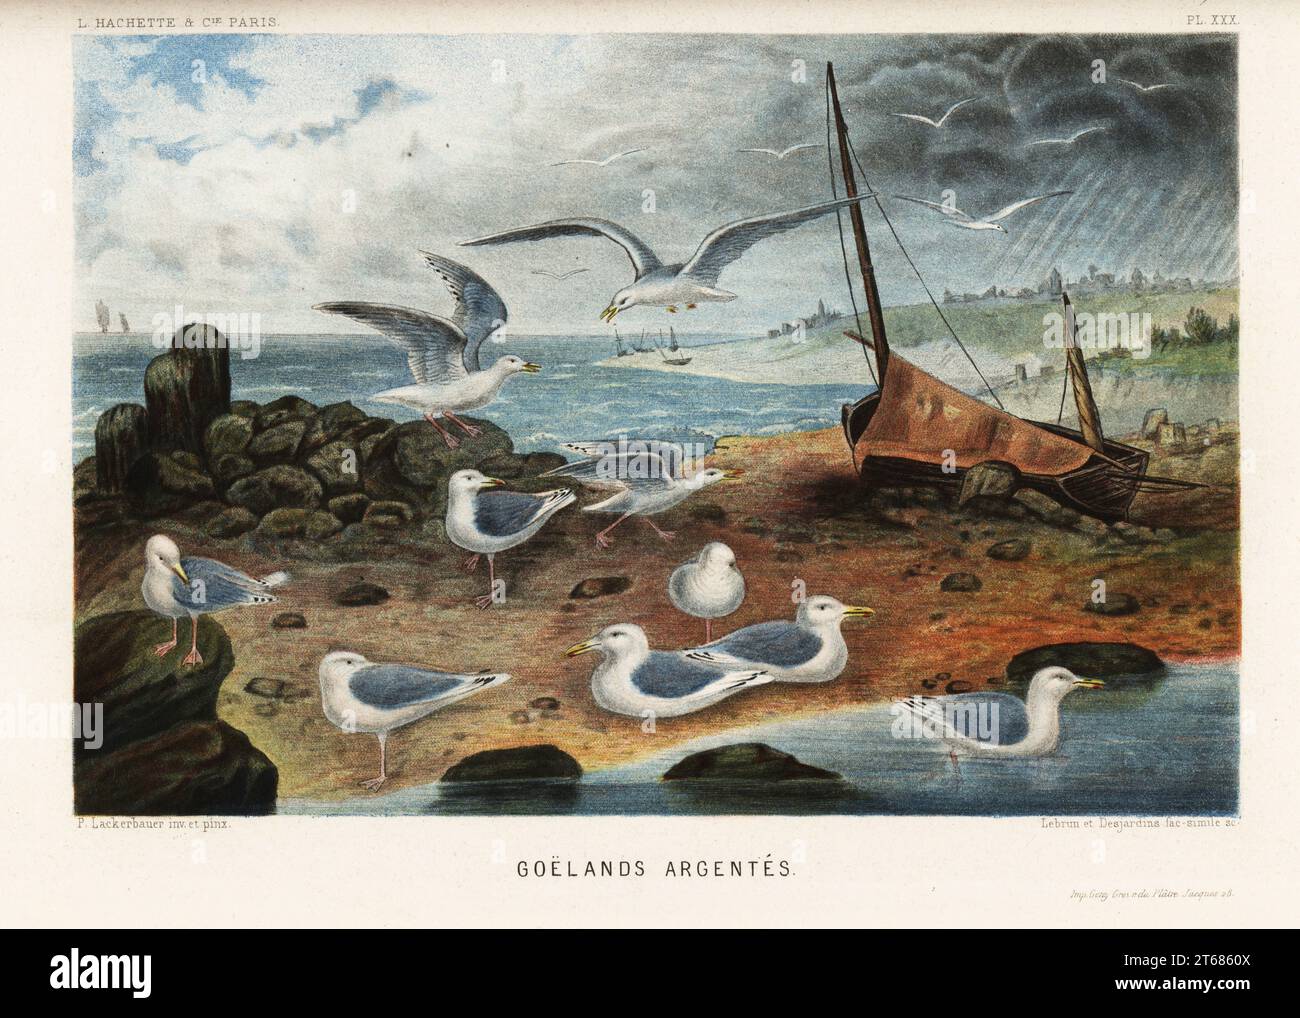 European herring gulls, Larus argentatus. On a beach near rocks and sailboats. Goelands argentes. Chromolithograph by Pierre Lackerbauer from Alfred Fredols Le Monde de la Mer, the World of the Sea, edited by Olivier Fredol, Librairie Hachette et. Cie., Paris, 1881. Alfred Fredol was the pseudonym of French zoologist and botanist Alfred Moquin-Tandon, 1804-1863. Stock Photo